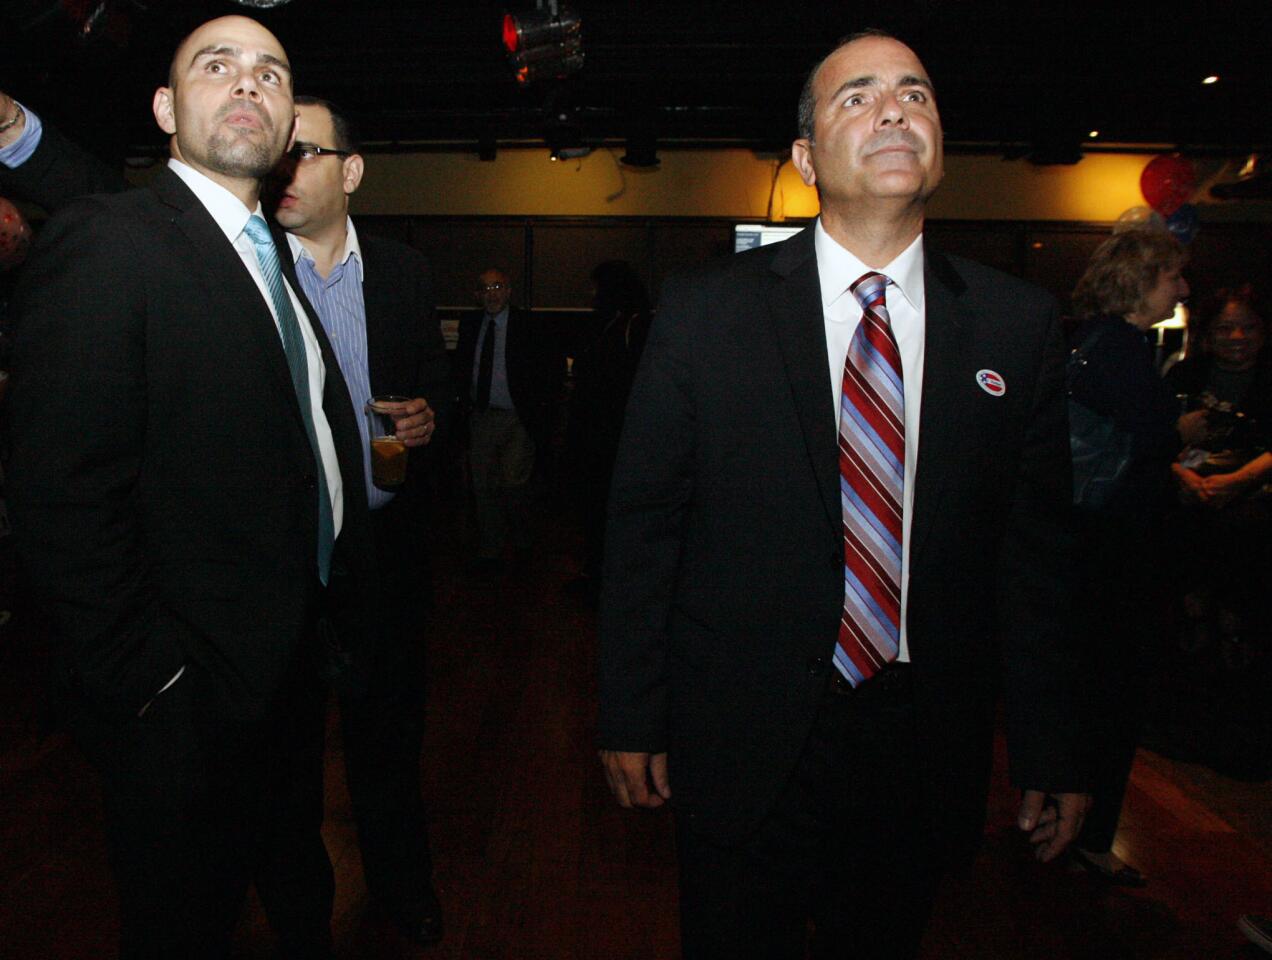 State Assembly candidate Greg Krikorian's election night